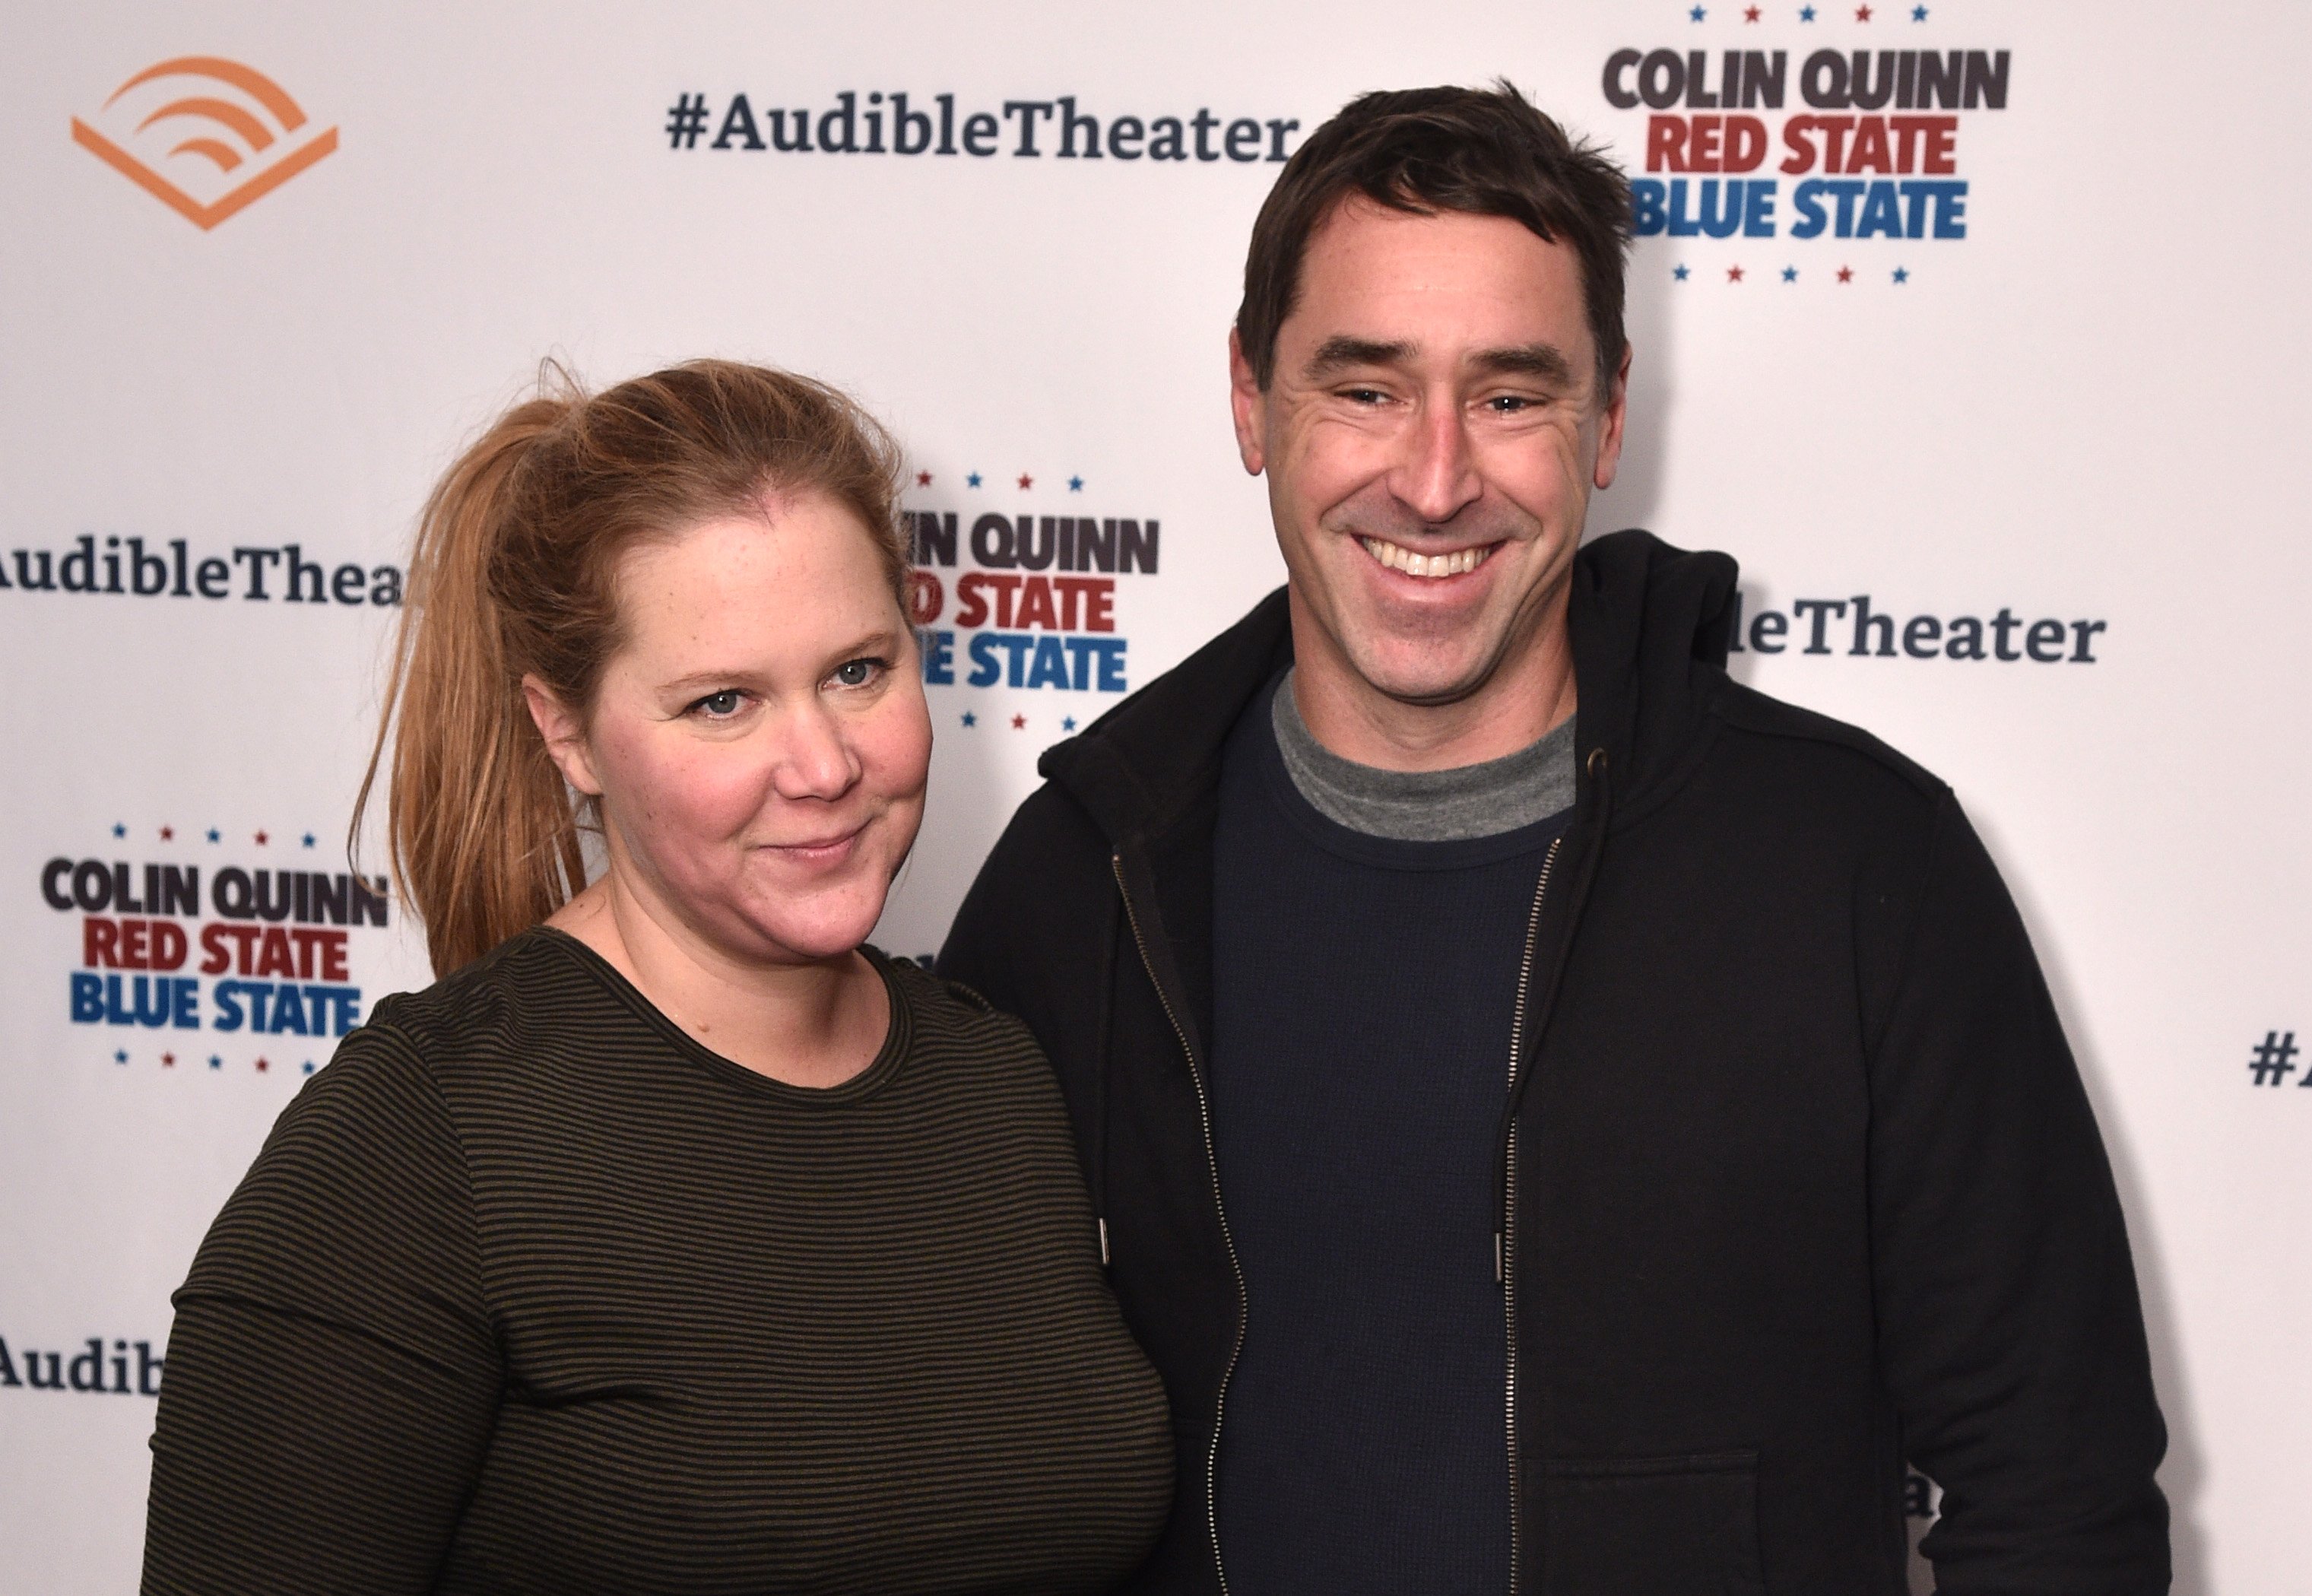 Amy Schumer and Chris Fischer attend the Opening Night for Colin Quinn's "Red State Blue State" at Audible's Minetta Lane Theatre in NYC  on January 22, 2019. | Photo: Getty Images